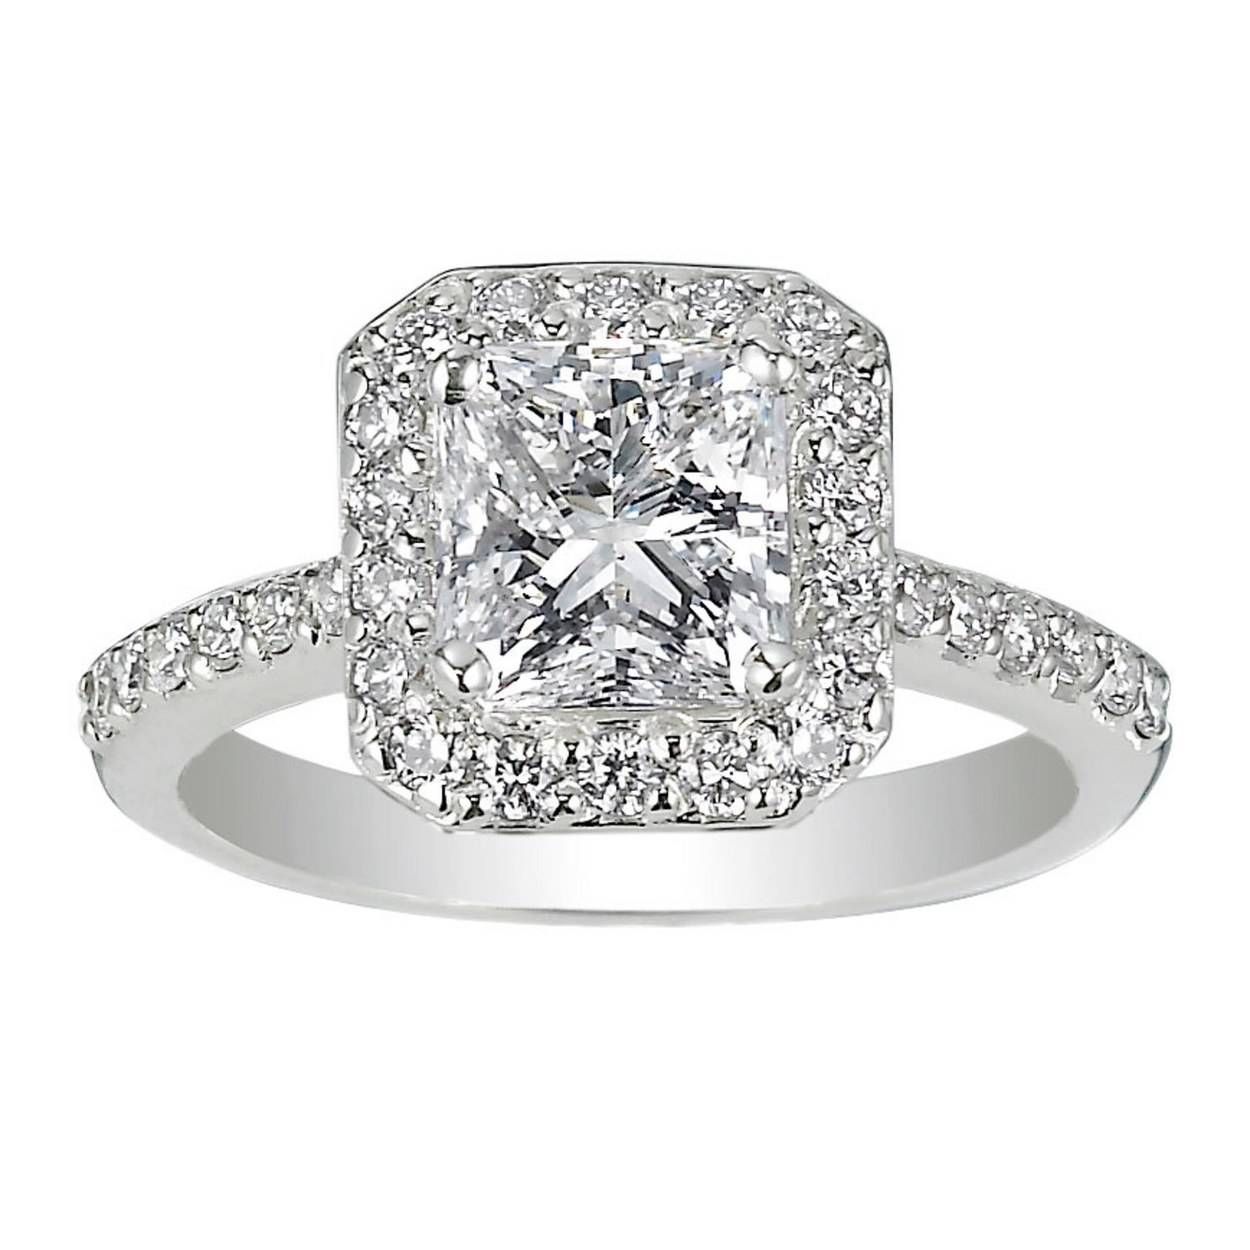 62 Diamond Engagement Rings Under $5,000 | Glamour Pertaining To Square Wedding Rings For Women (View 1 of 15)